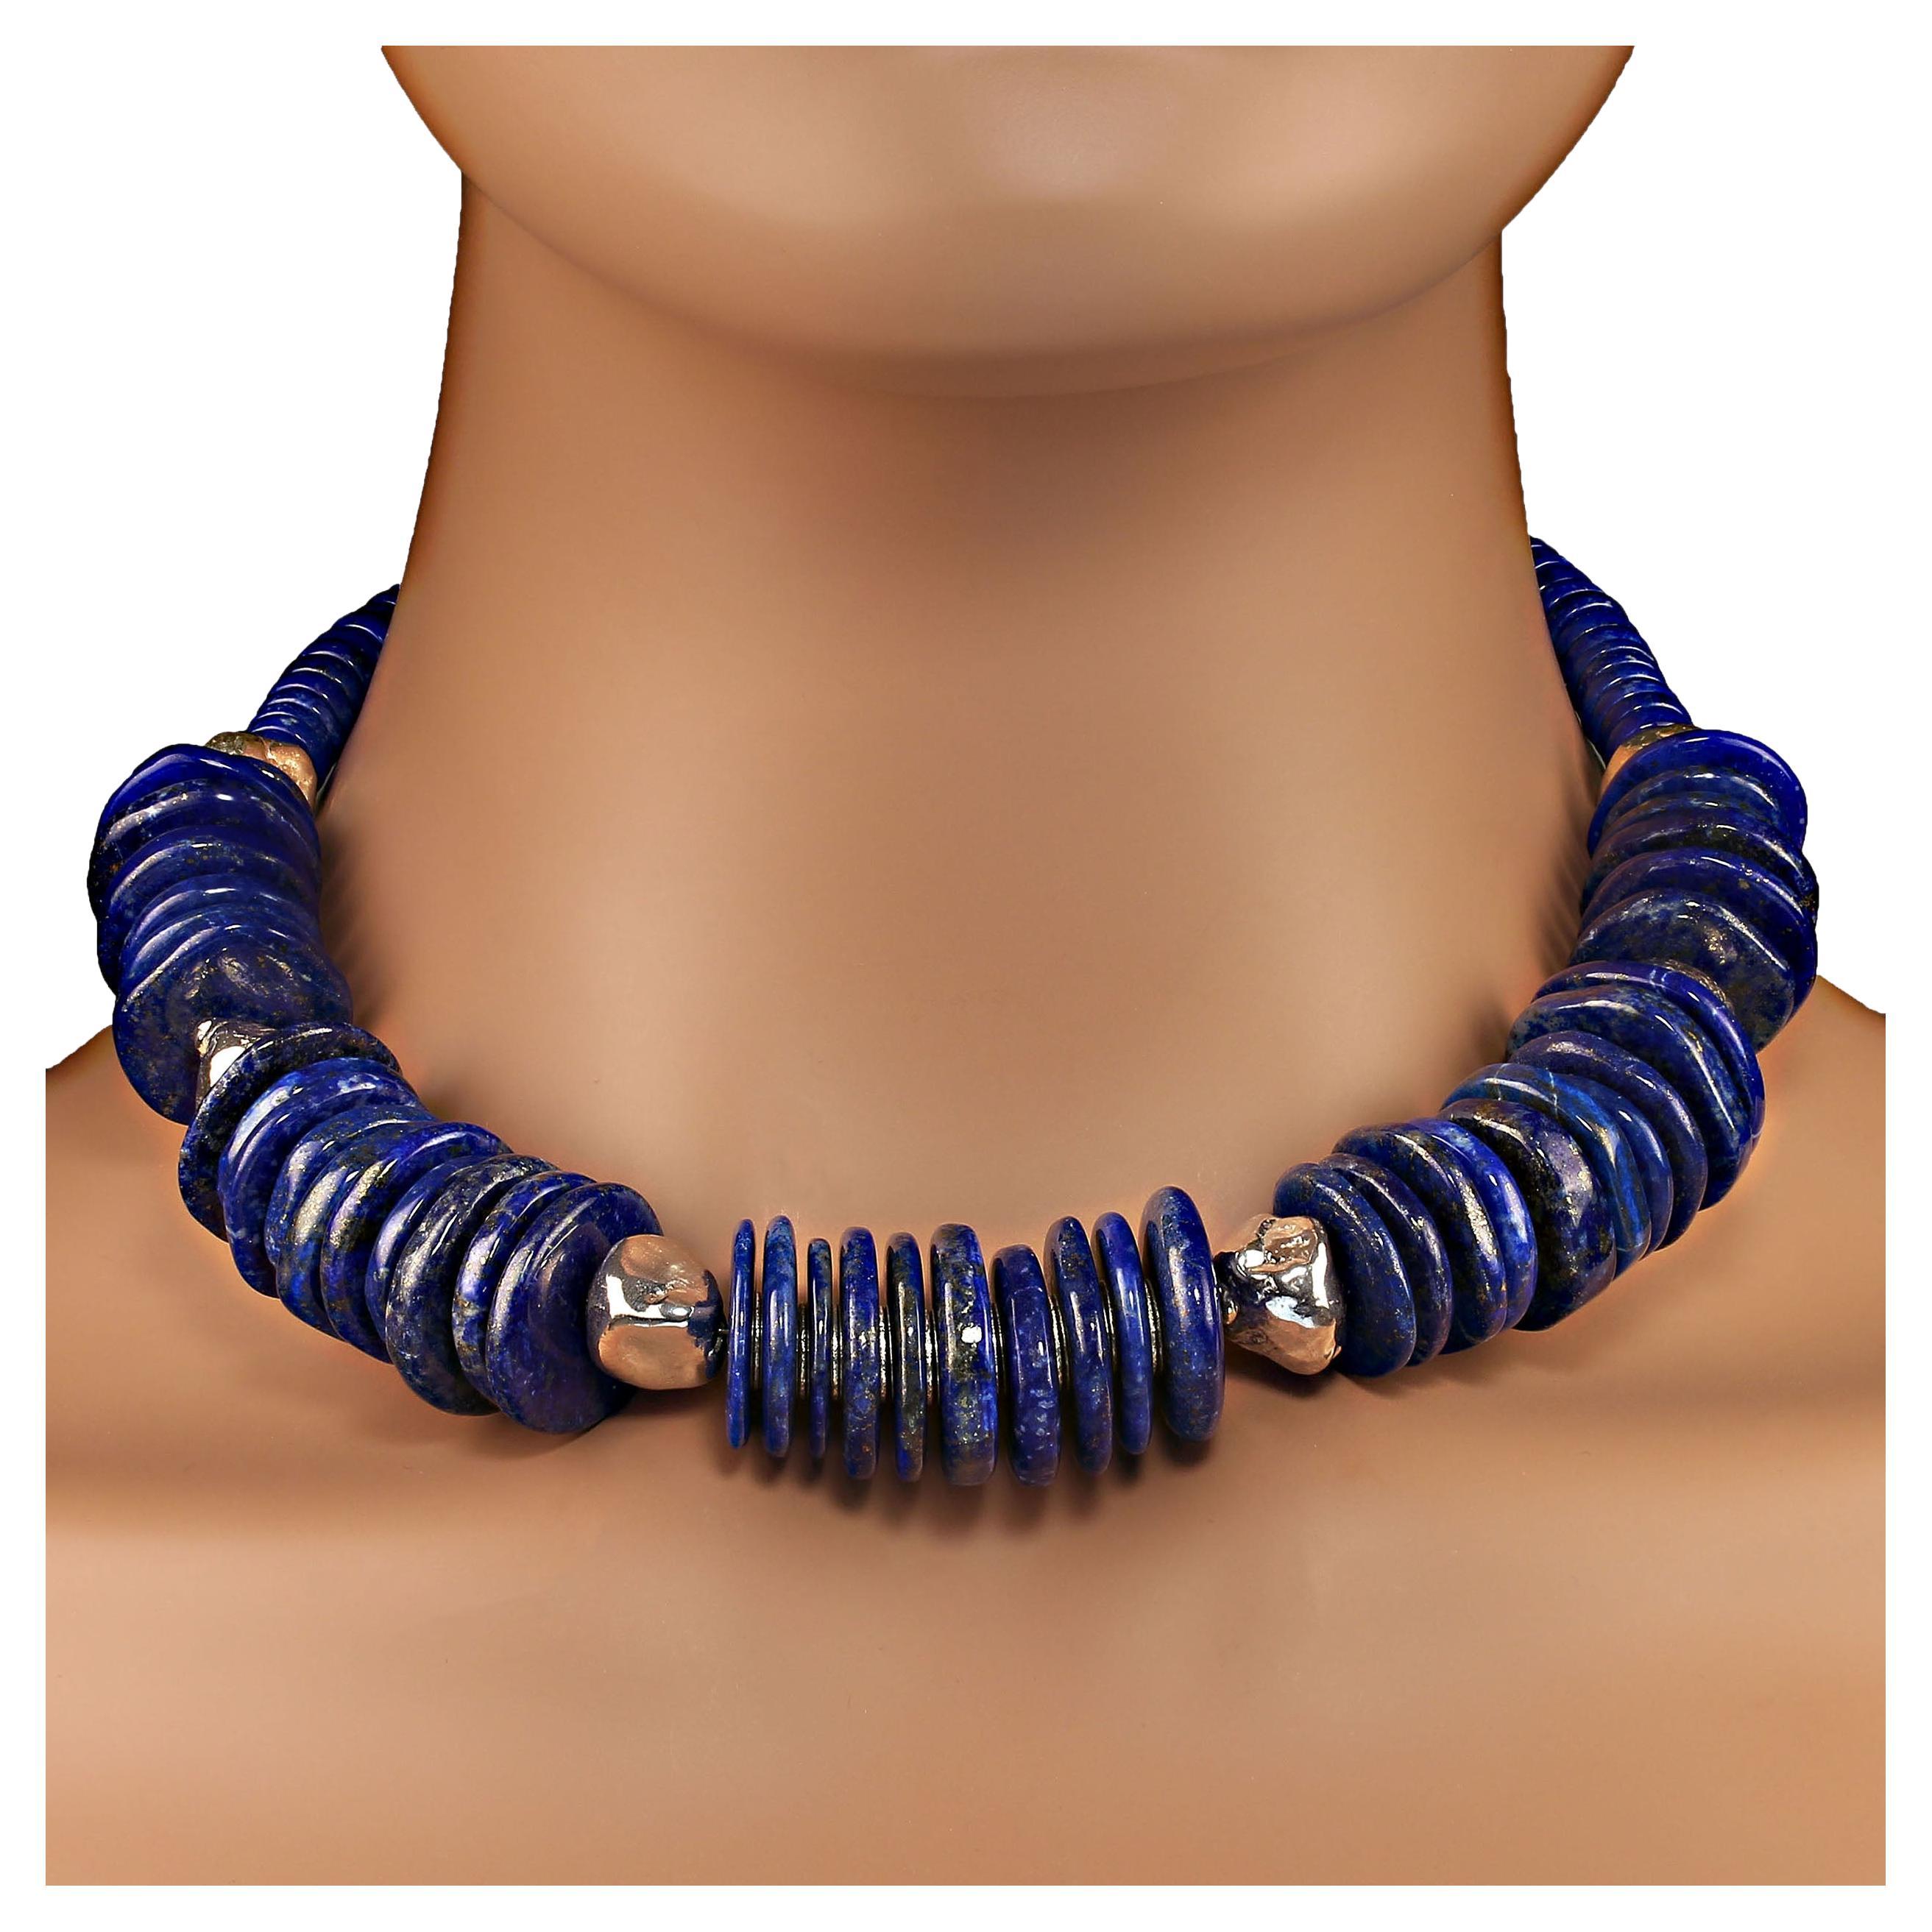 AJD 17 Inch Magnificent Choker Lapis Lazuli and Sterling Silver Necklace 